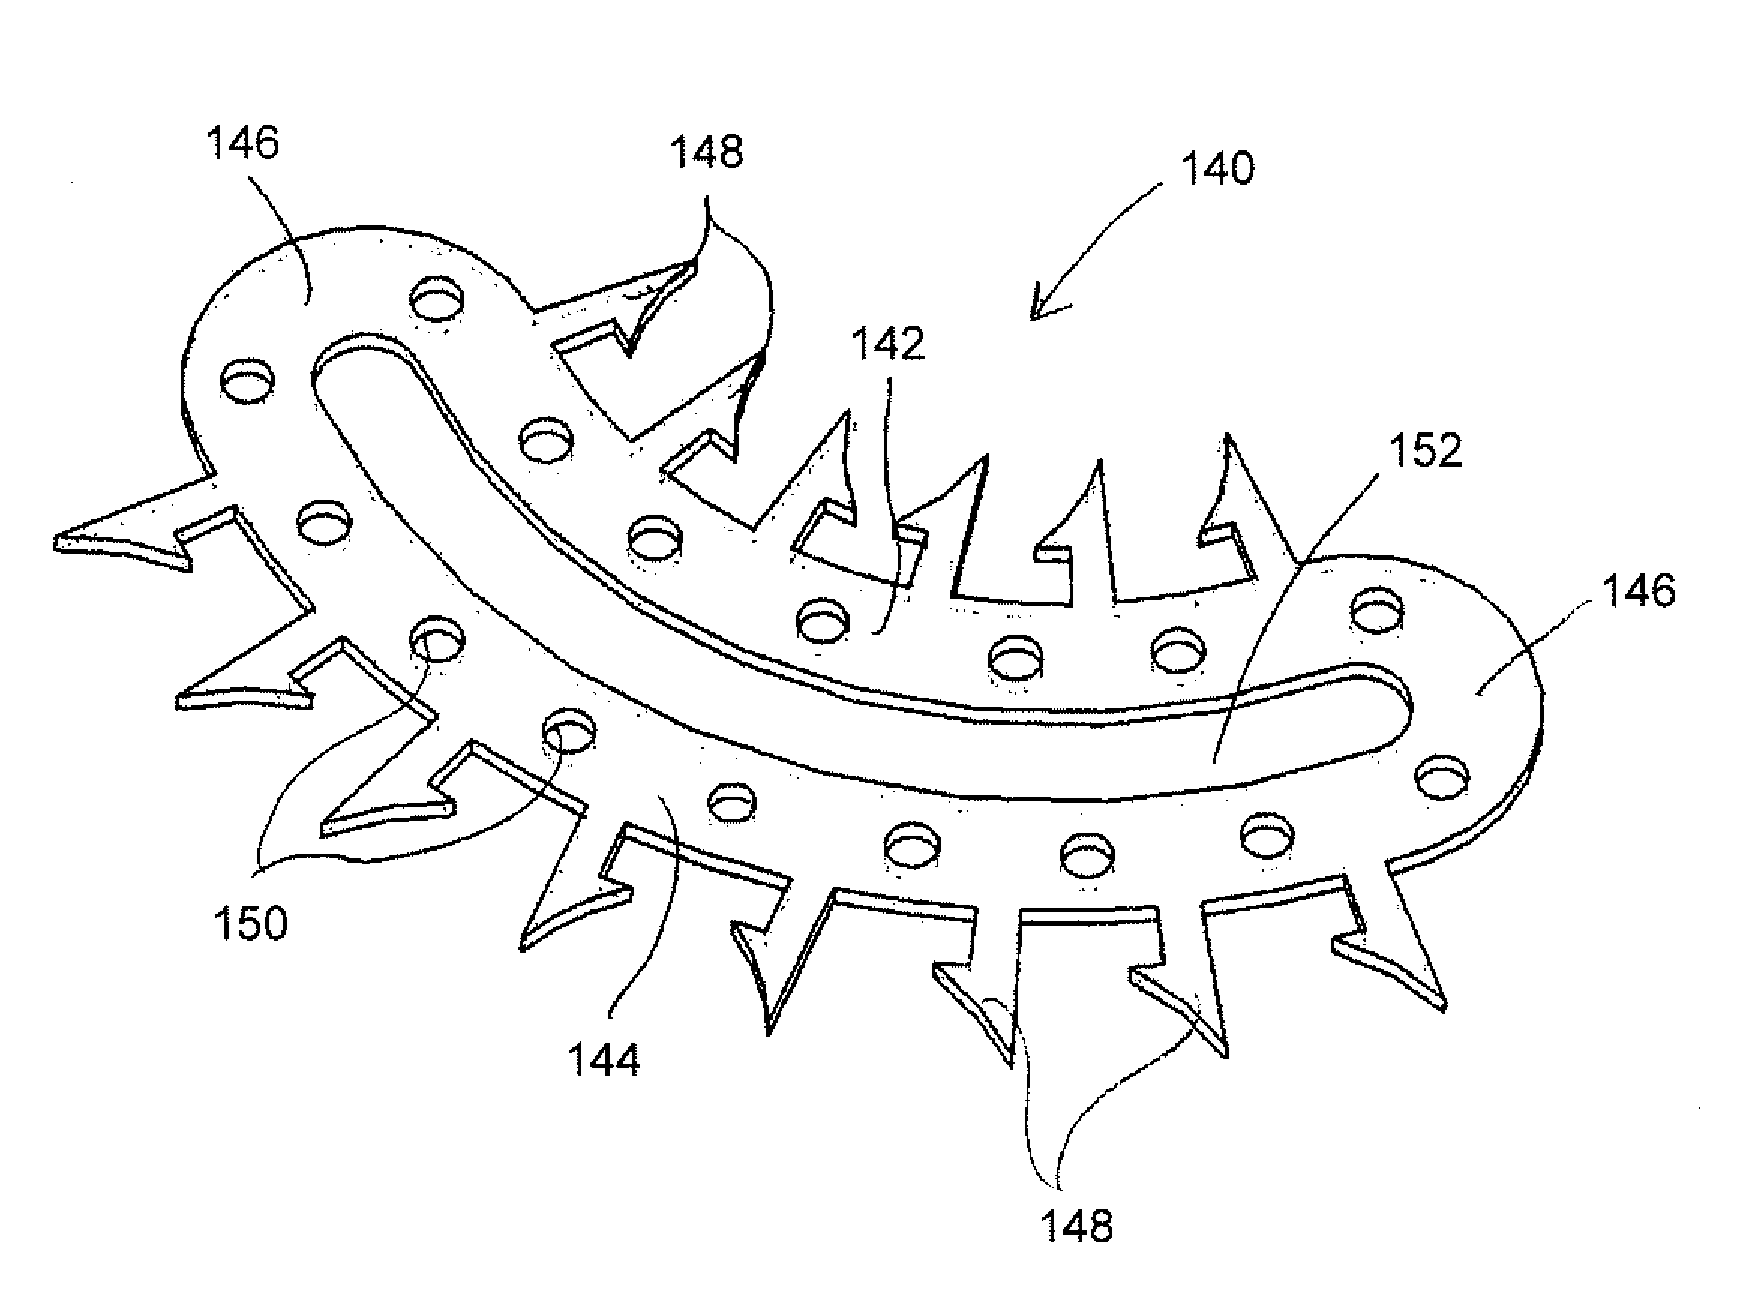 Devices and methods for the controlled formation and closure of vascular openings